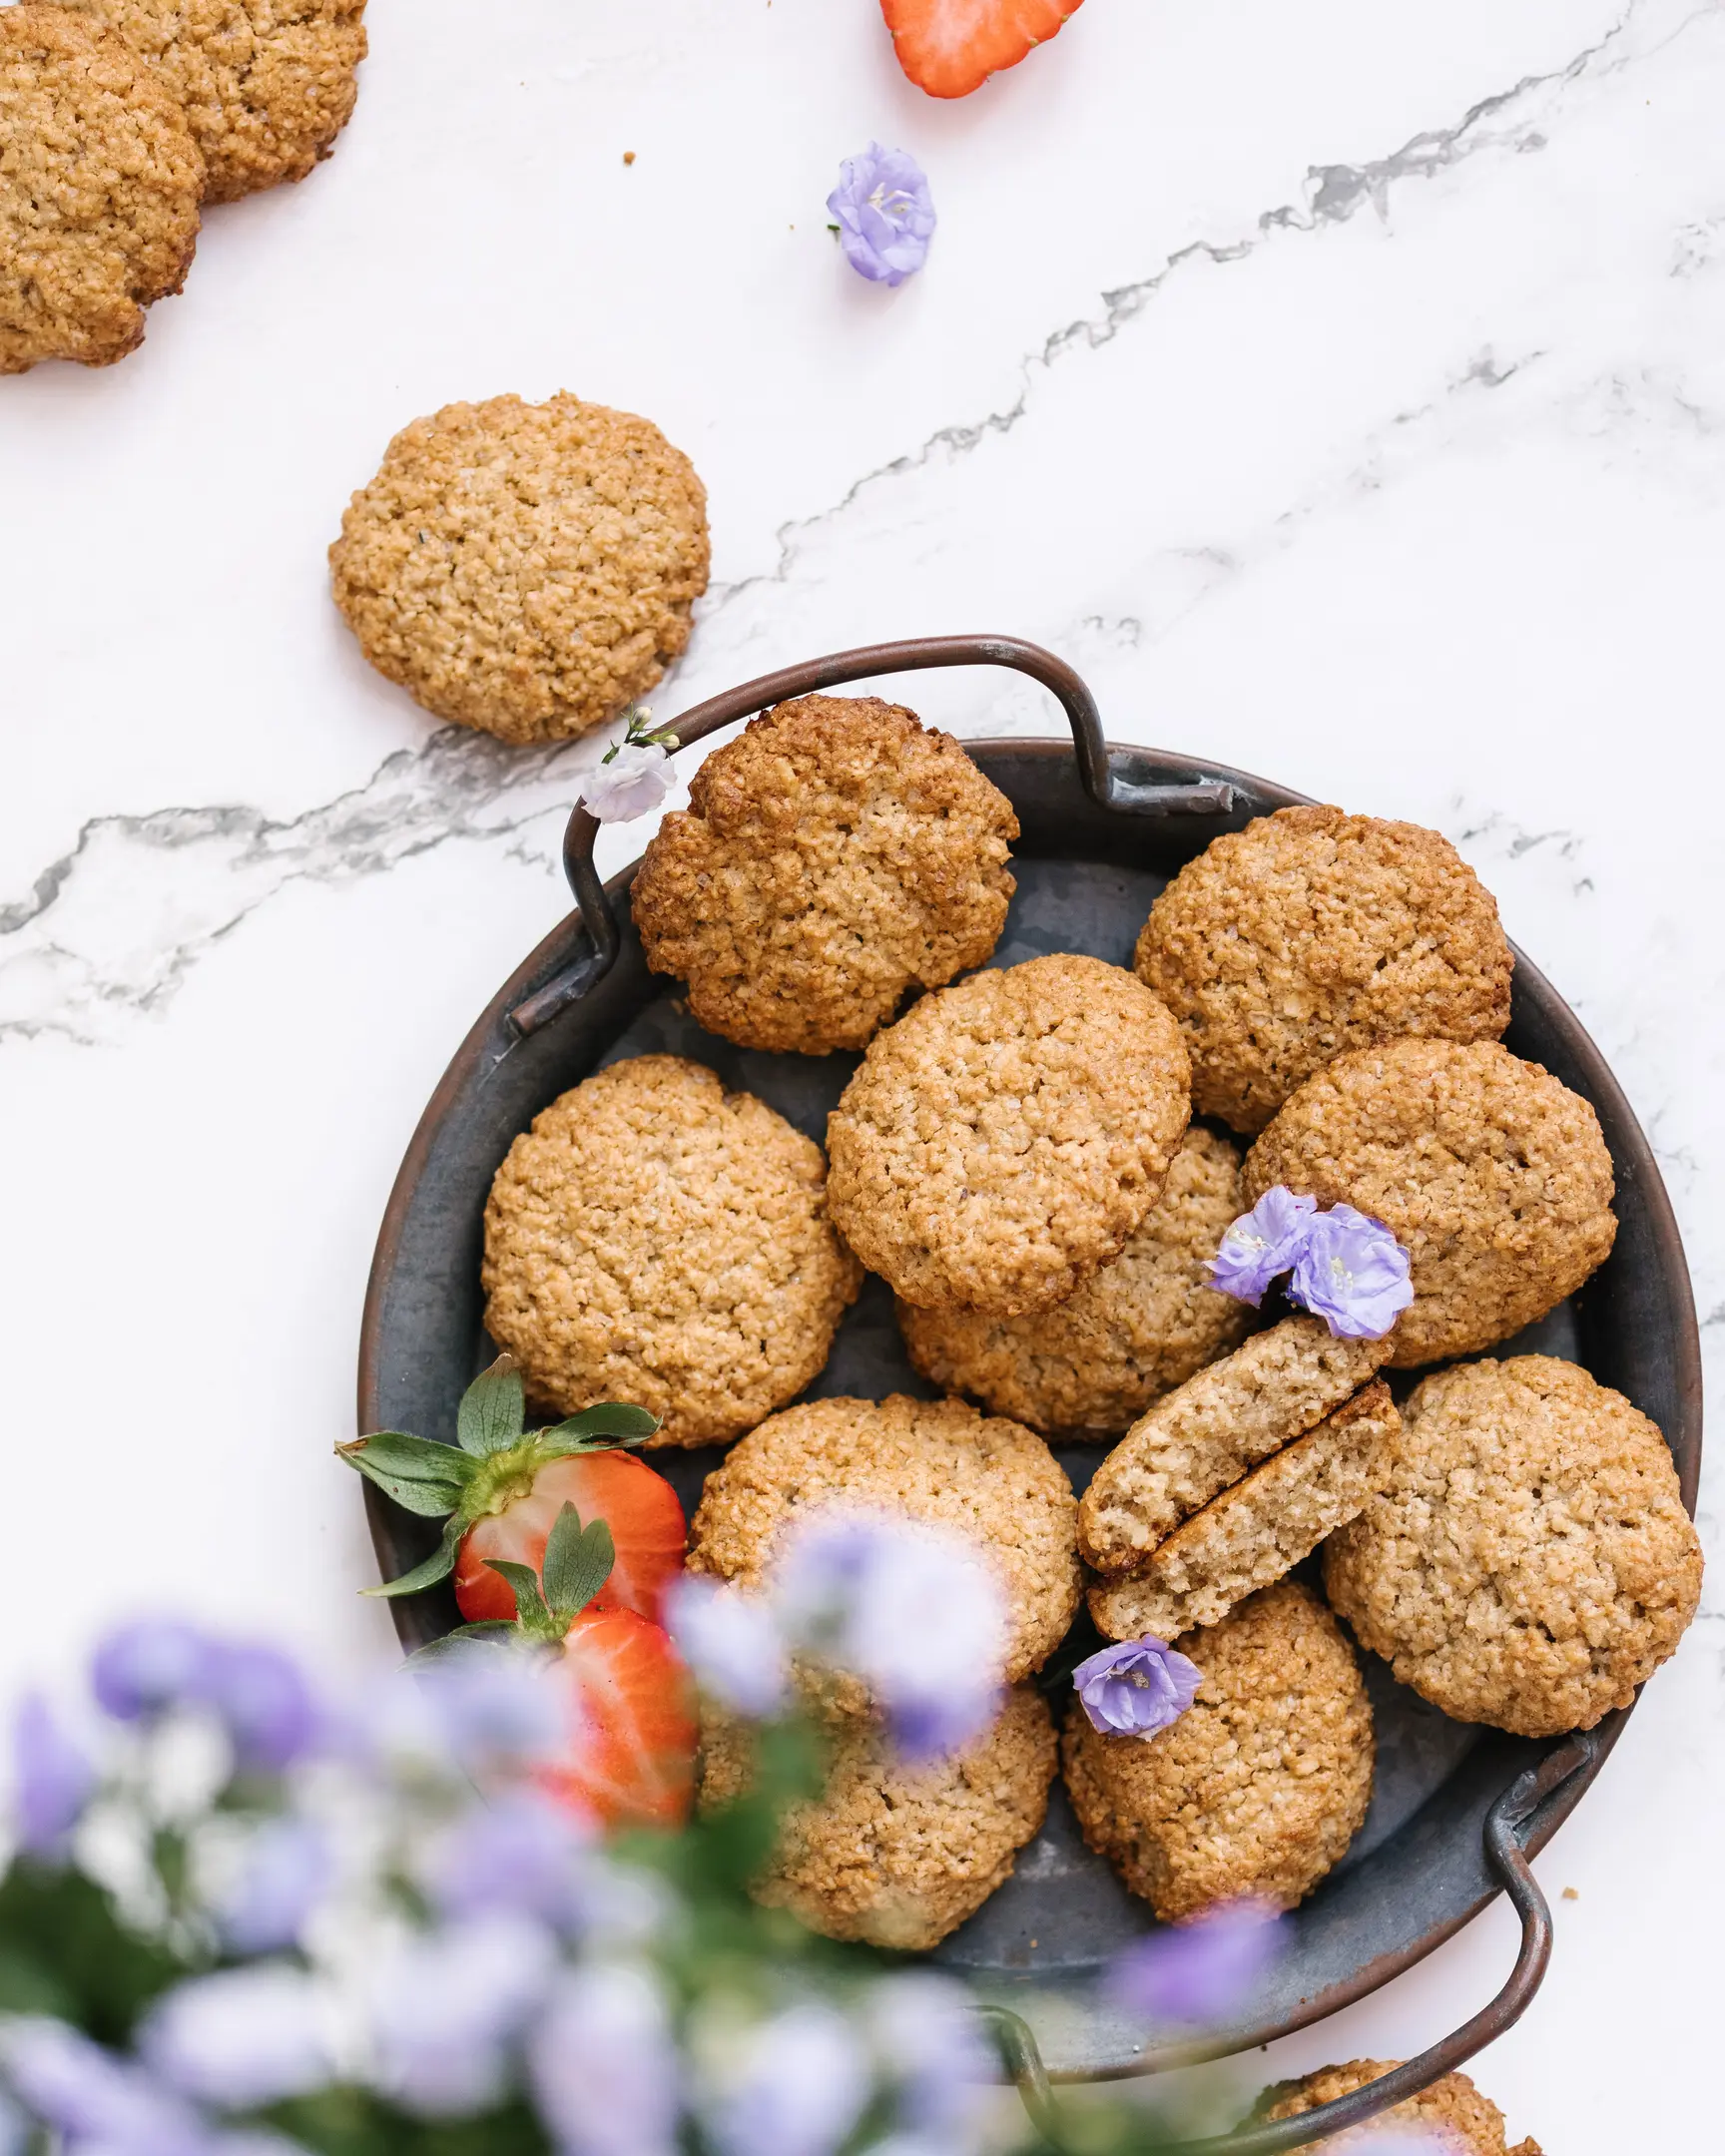 There are oatmeal cookies on a metal plate.  There are oatmeal cookies on a metal plate. In the foreground in the frame are purple flowers. Some cookies are just on the table. One of the cookies is broken.